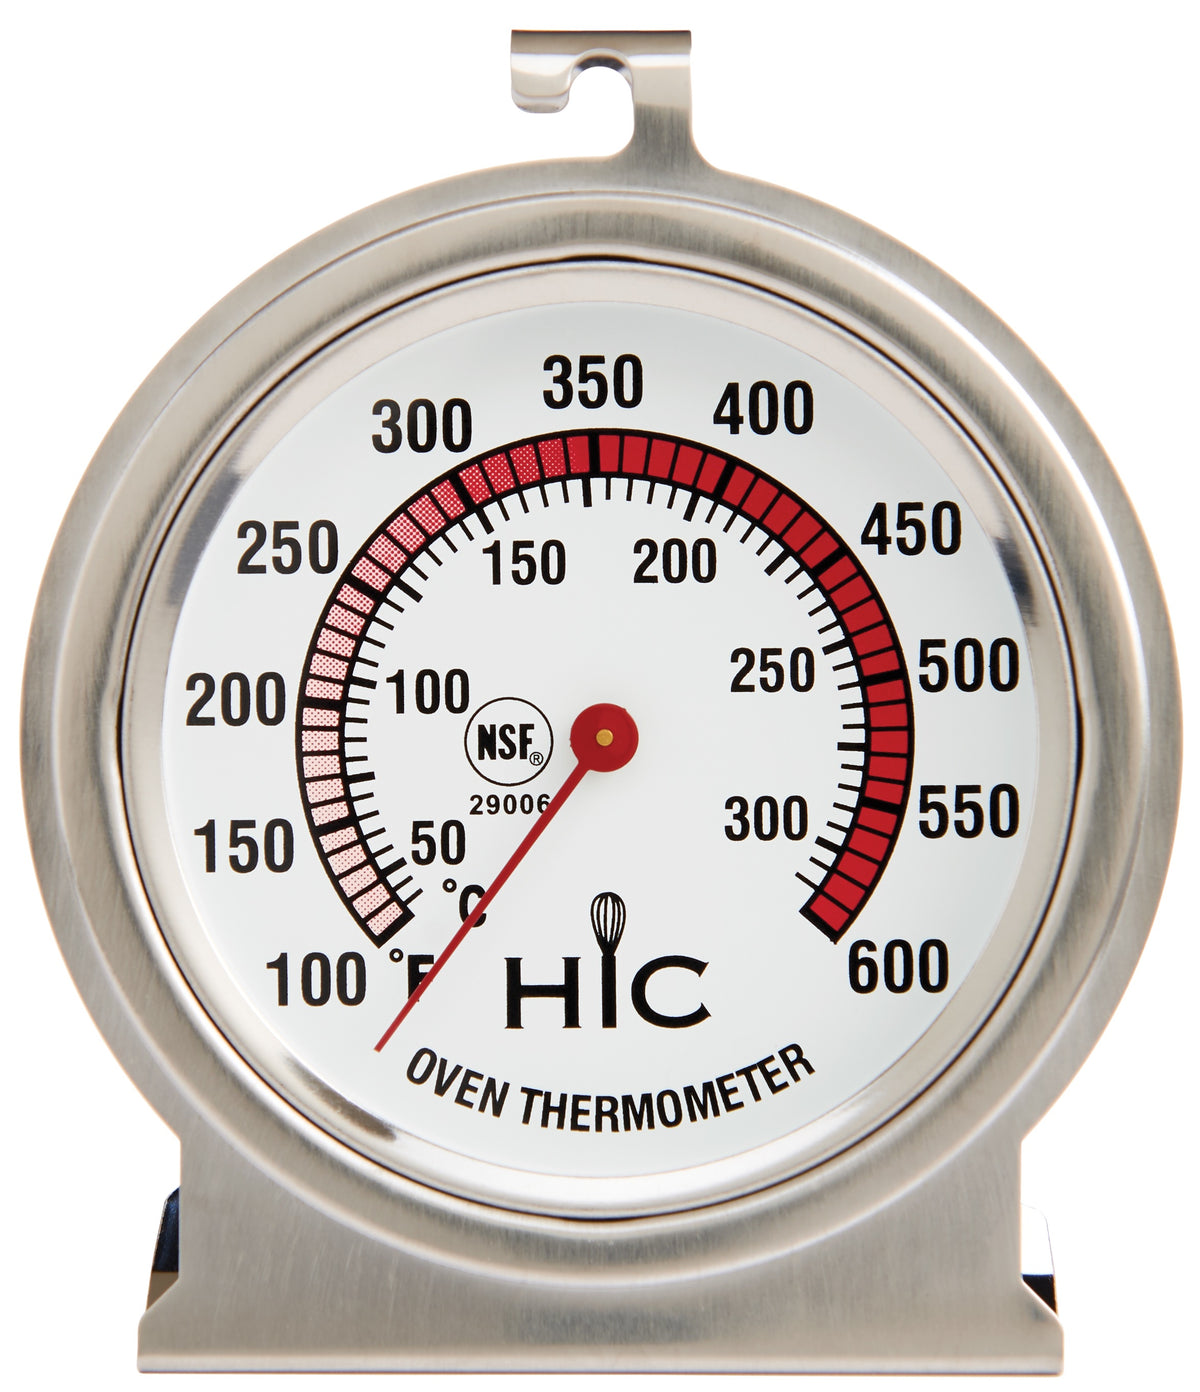 Harold Import 29006 Large Face Oven Thermometer, Stainless Steel